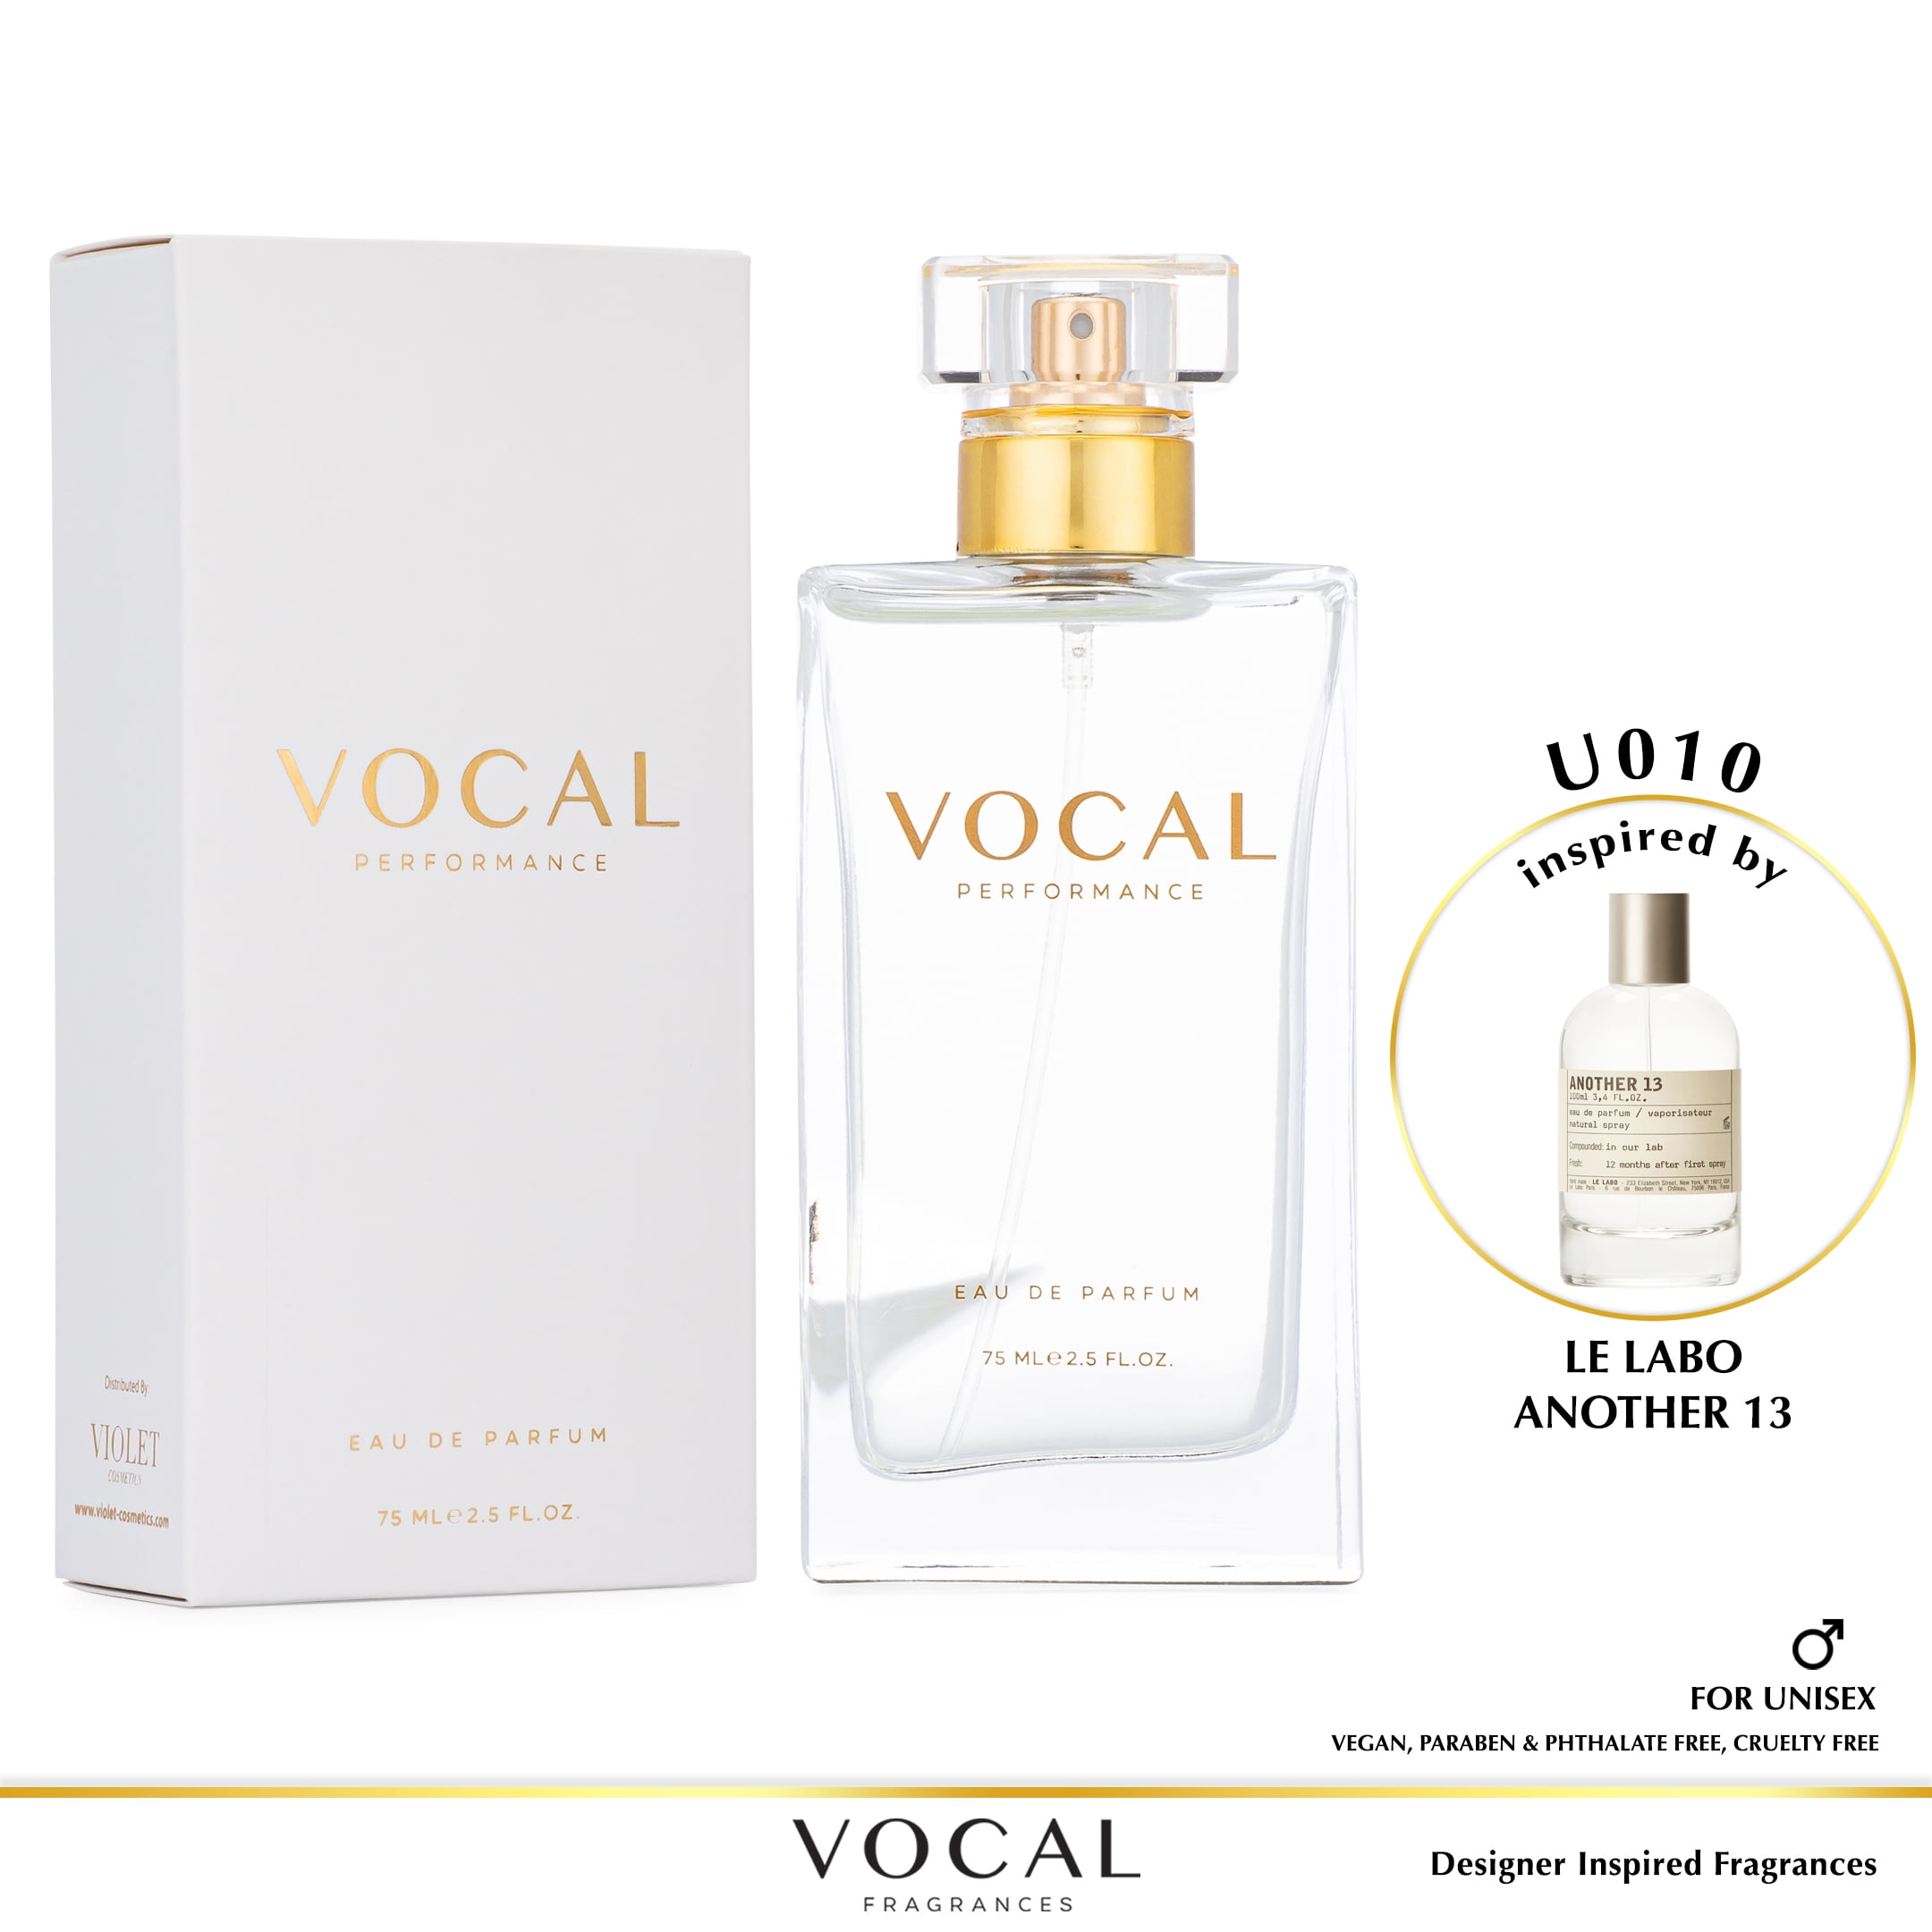 Vocal Fragrance Inspired by Le Labo Another Eau de Parfum For Unisex 2.5 FL. OZ. 75 ml. Vegan, & Phthalate Free Tested on Animals - Walmart.com